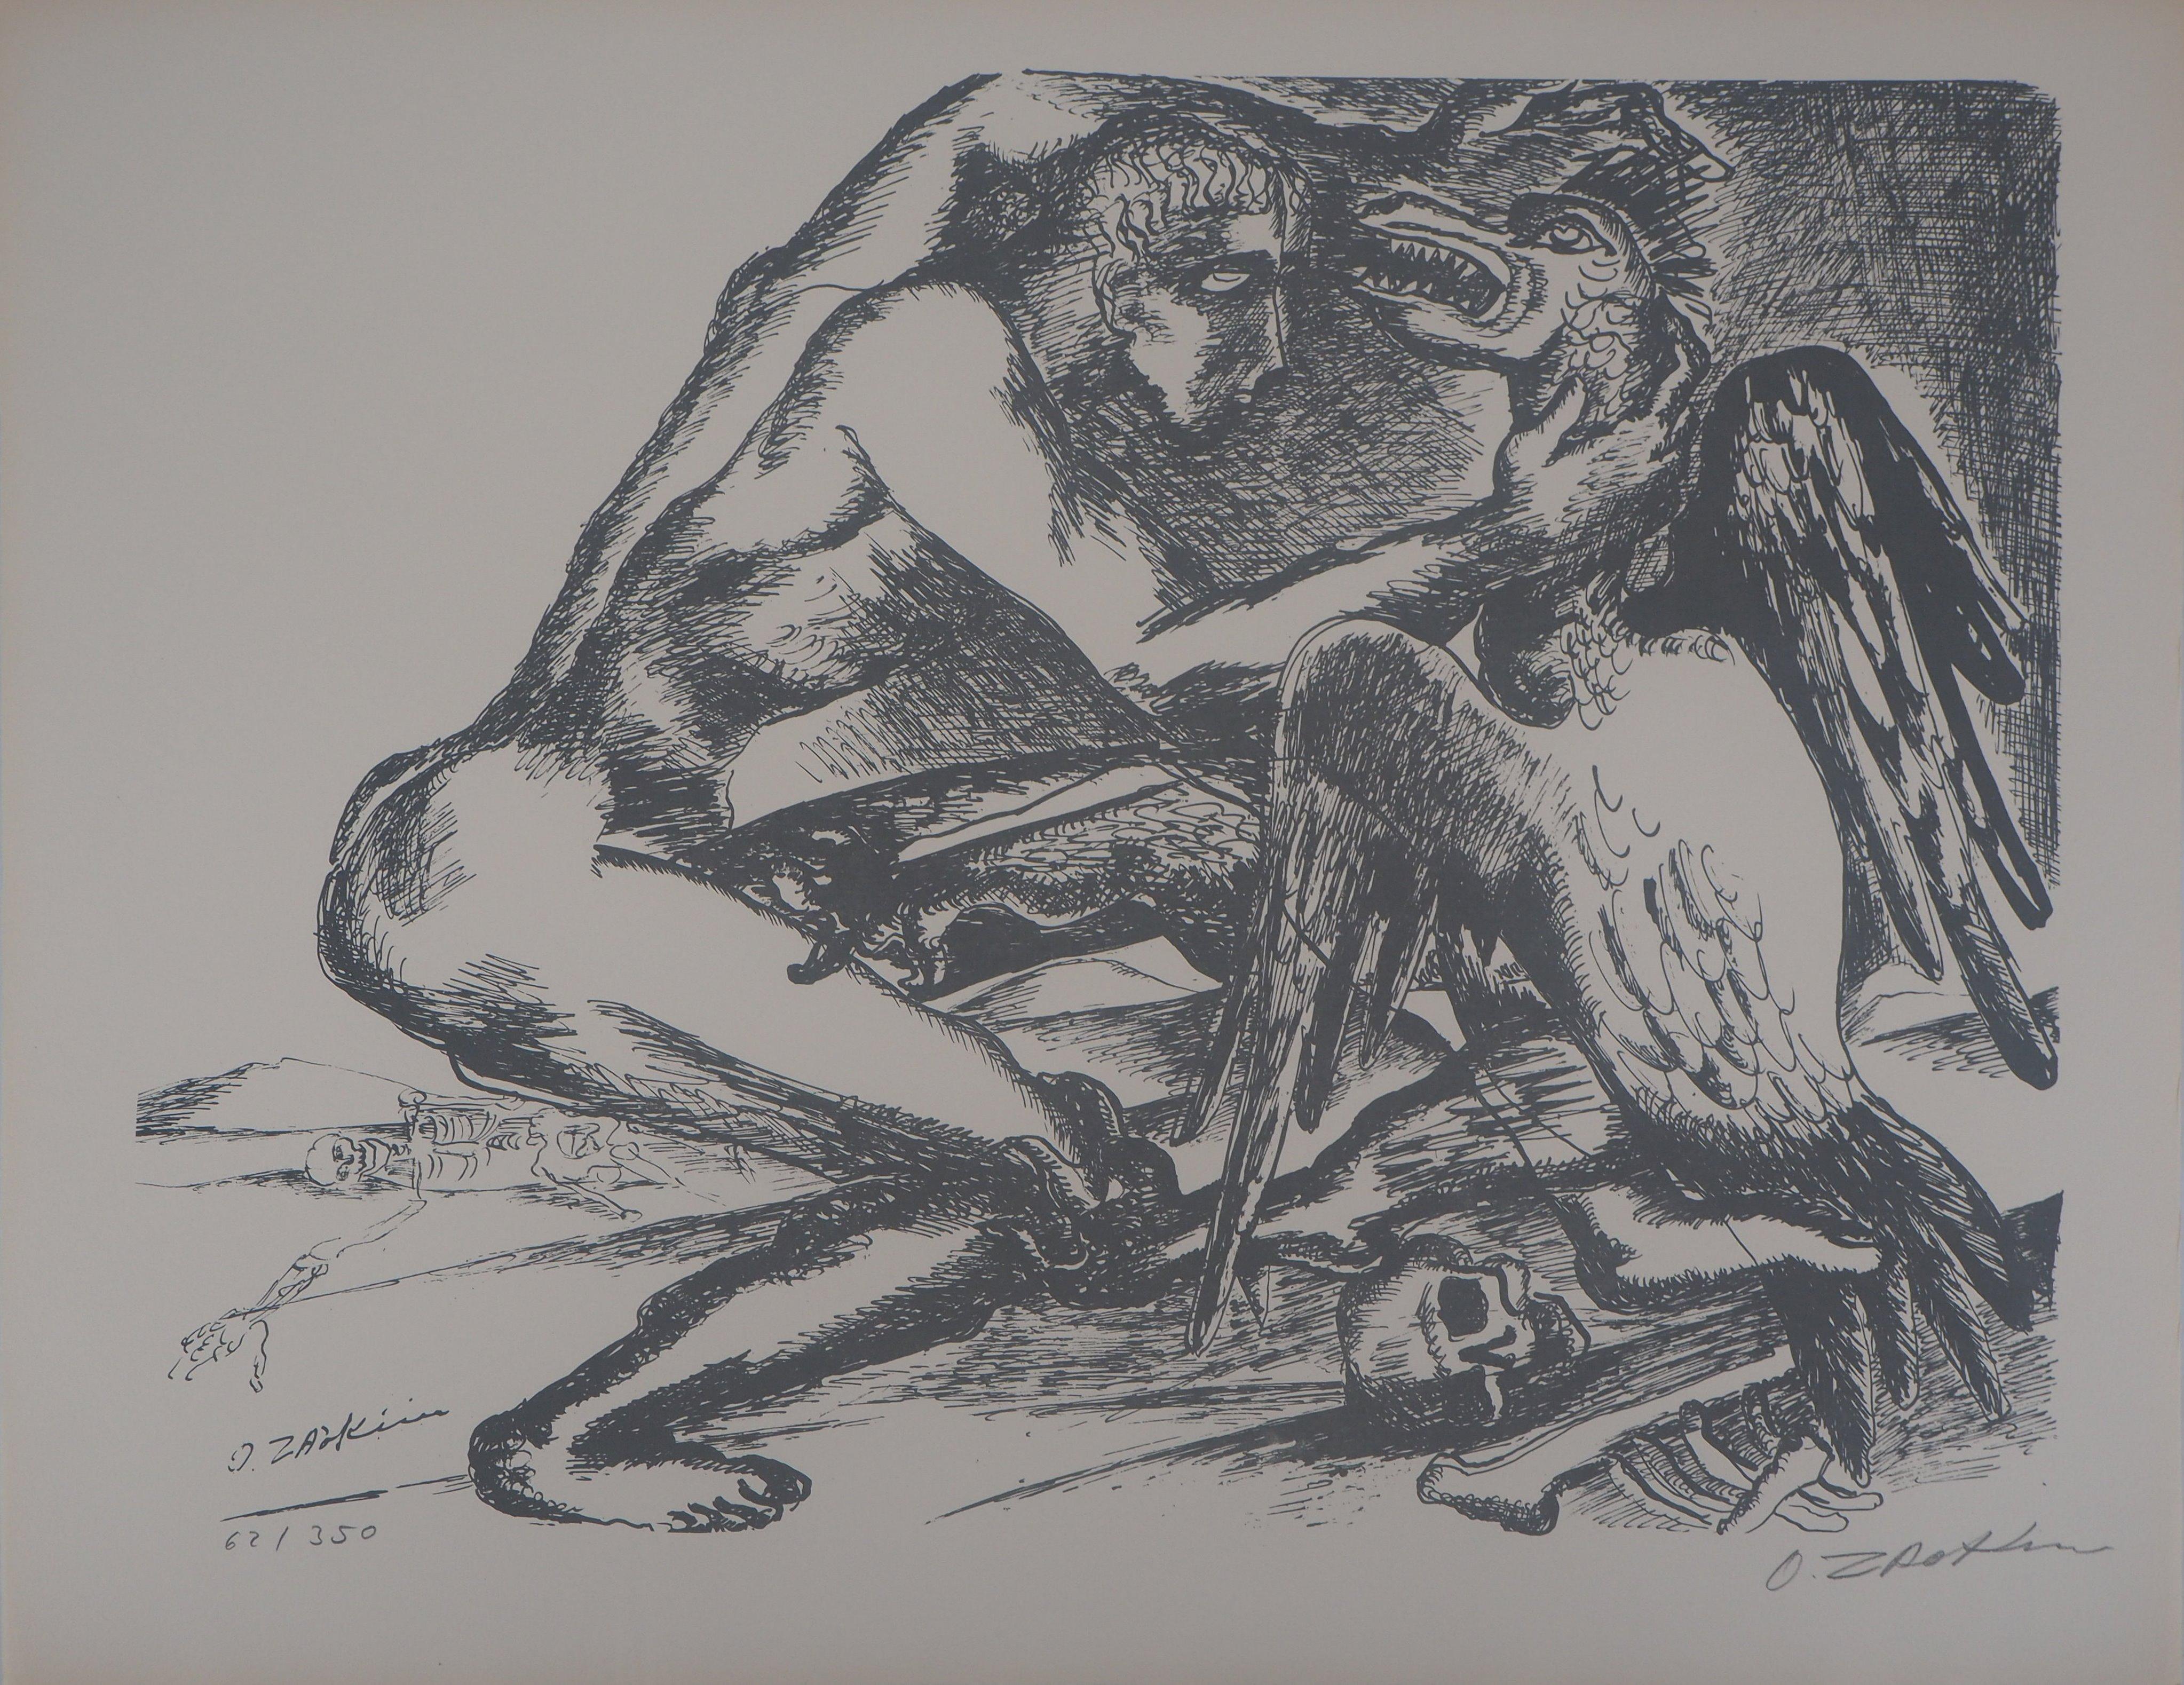 Ossip Zadkine Figurative Print - Mythology : Heracles and a Bird -Original Lithograph Hand Signed & Numbered